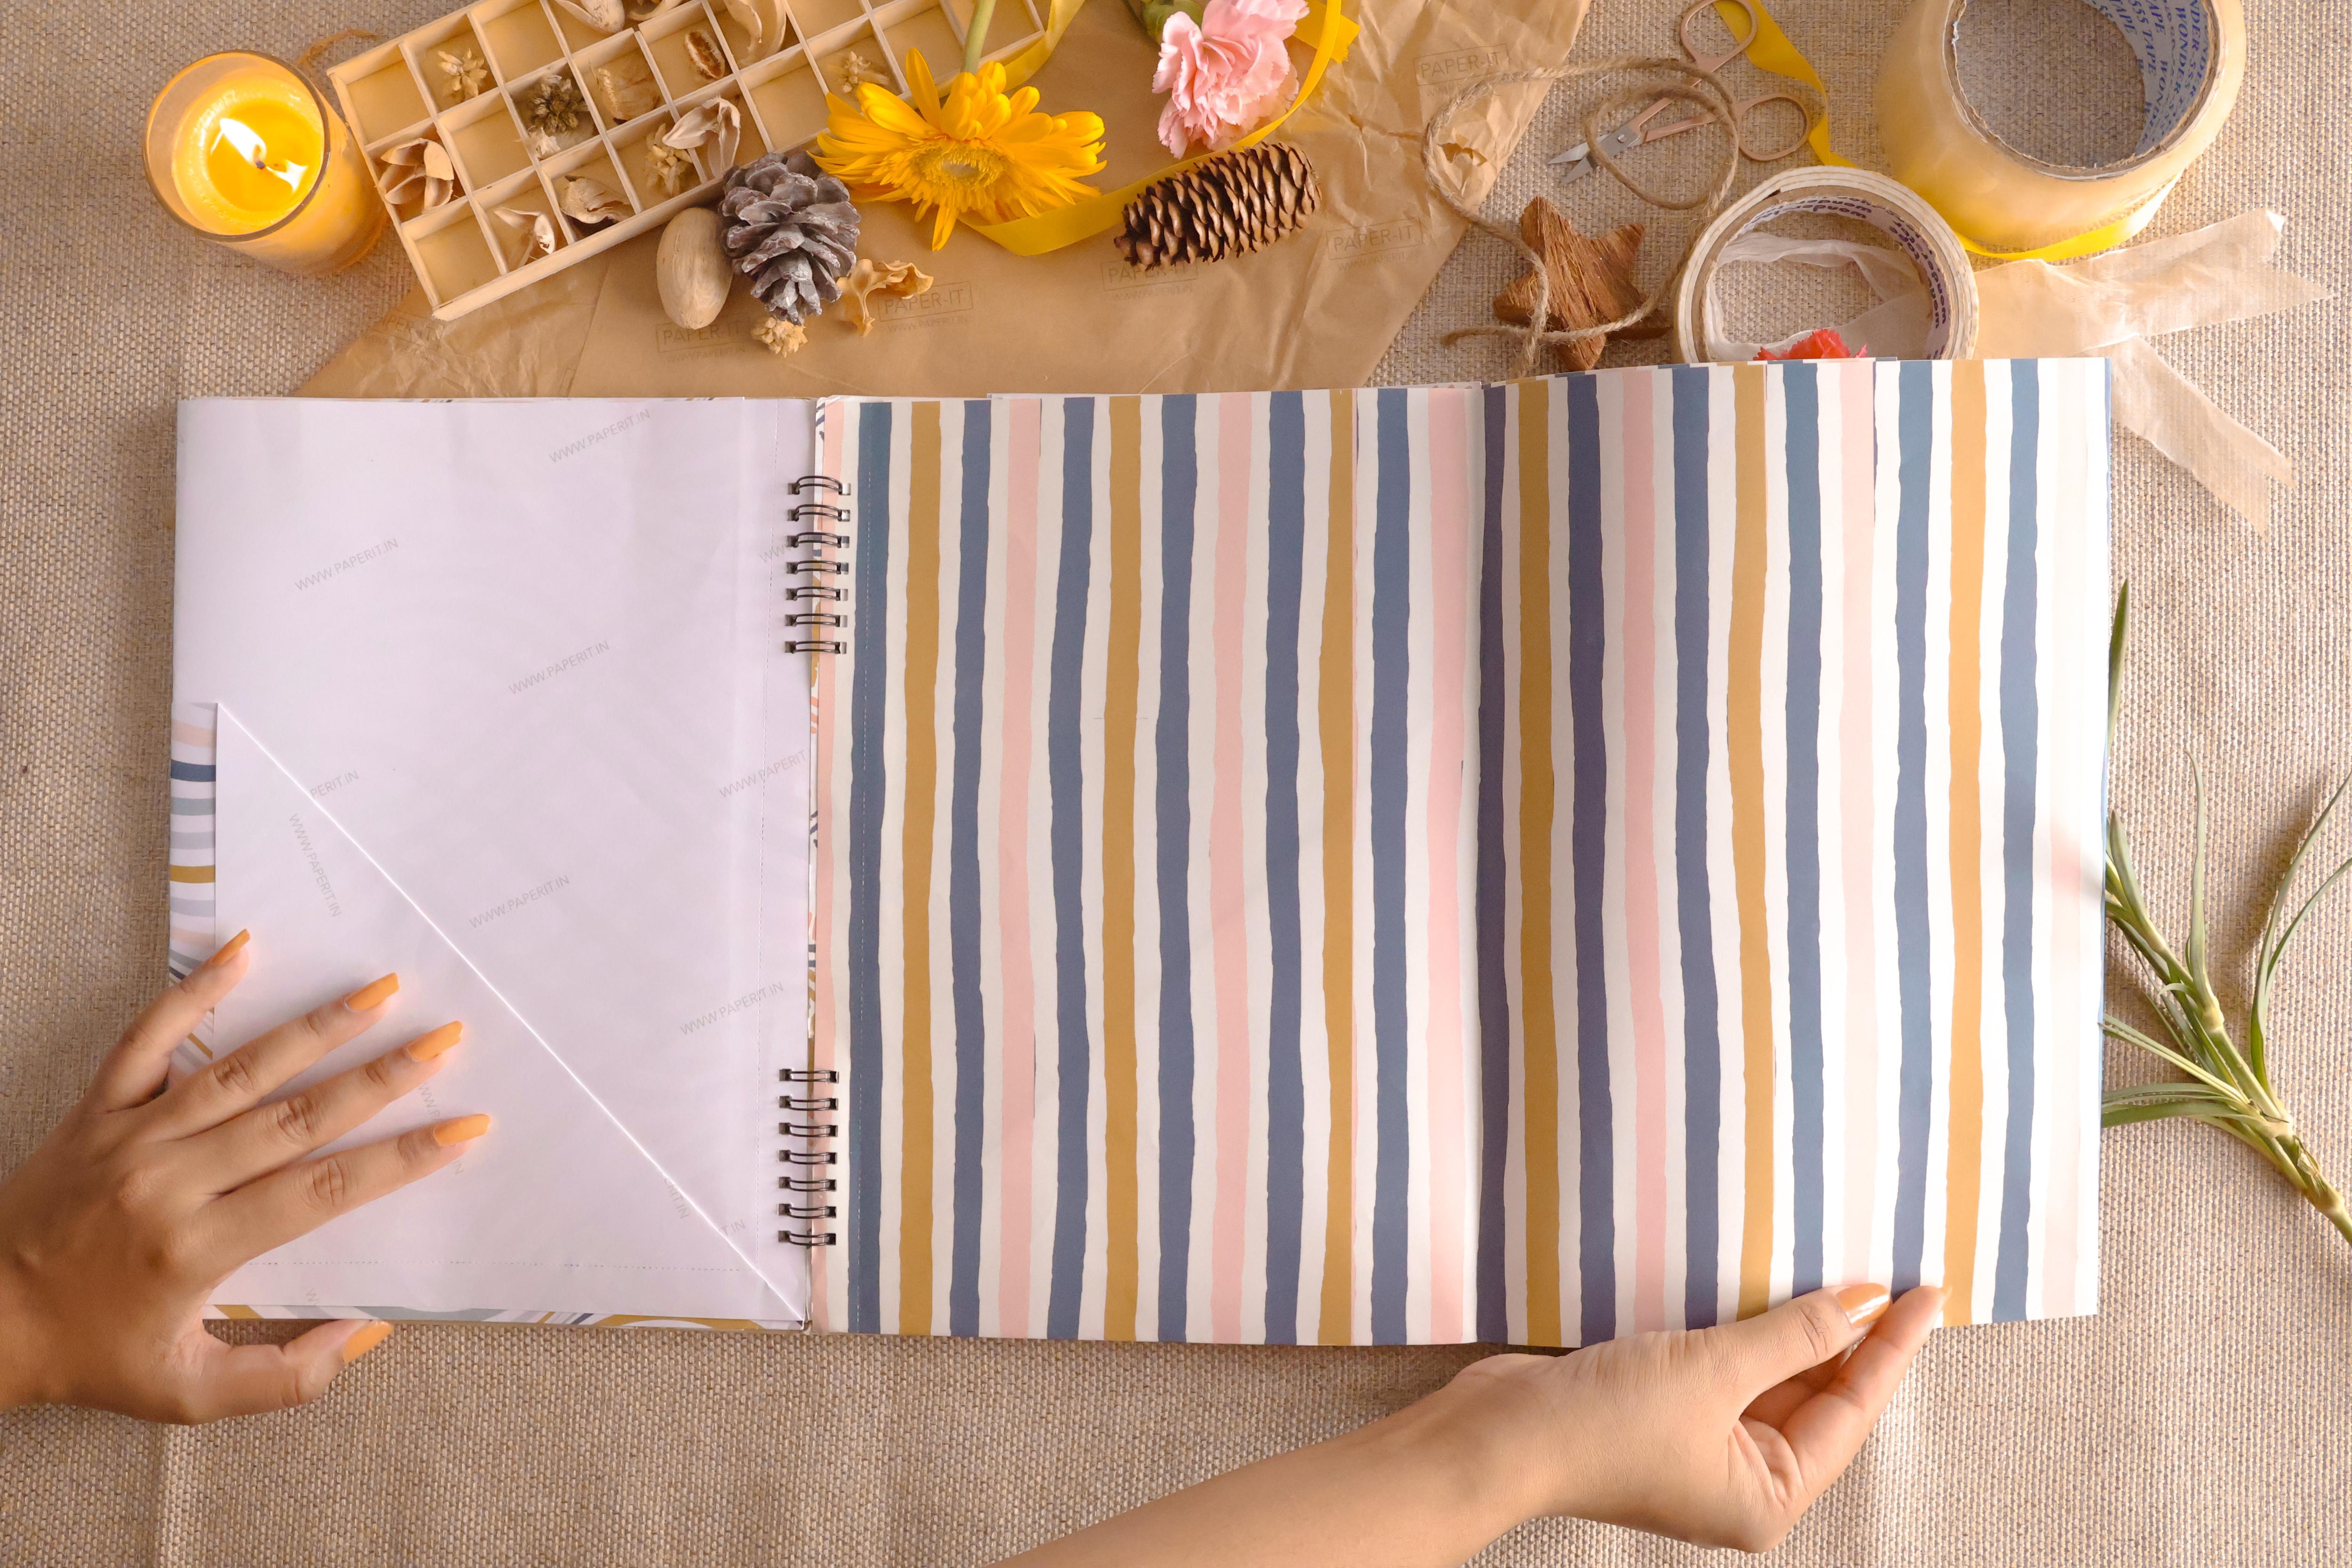 Pastels Wrapping sheet book <br/> (10 sheets)